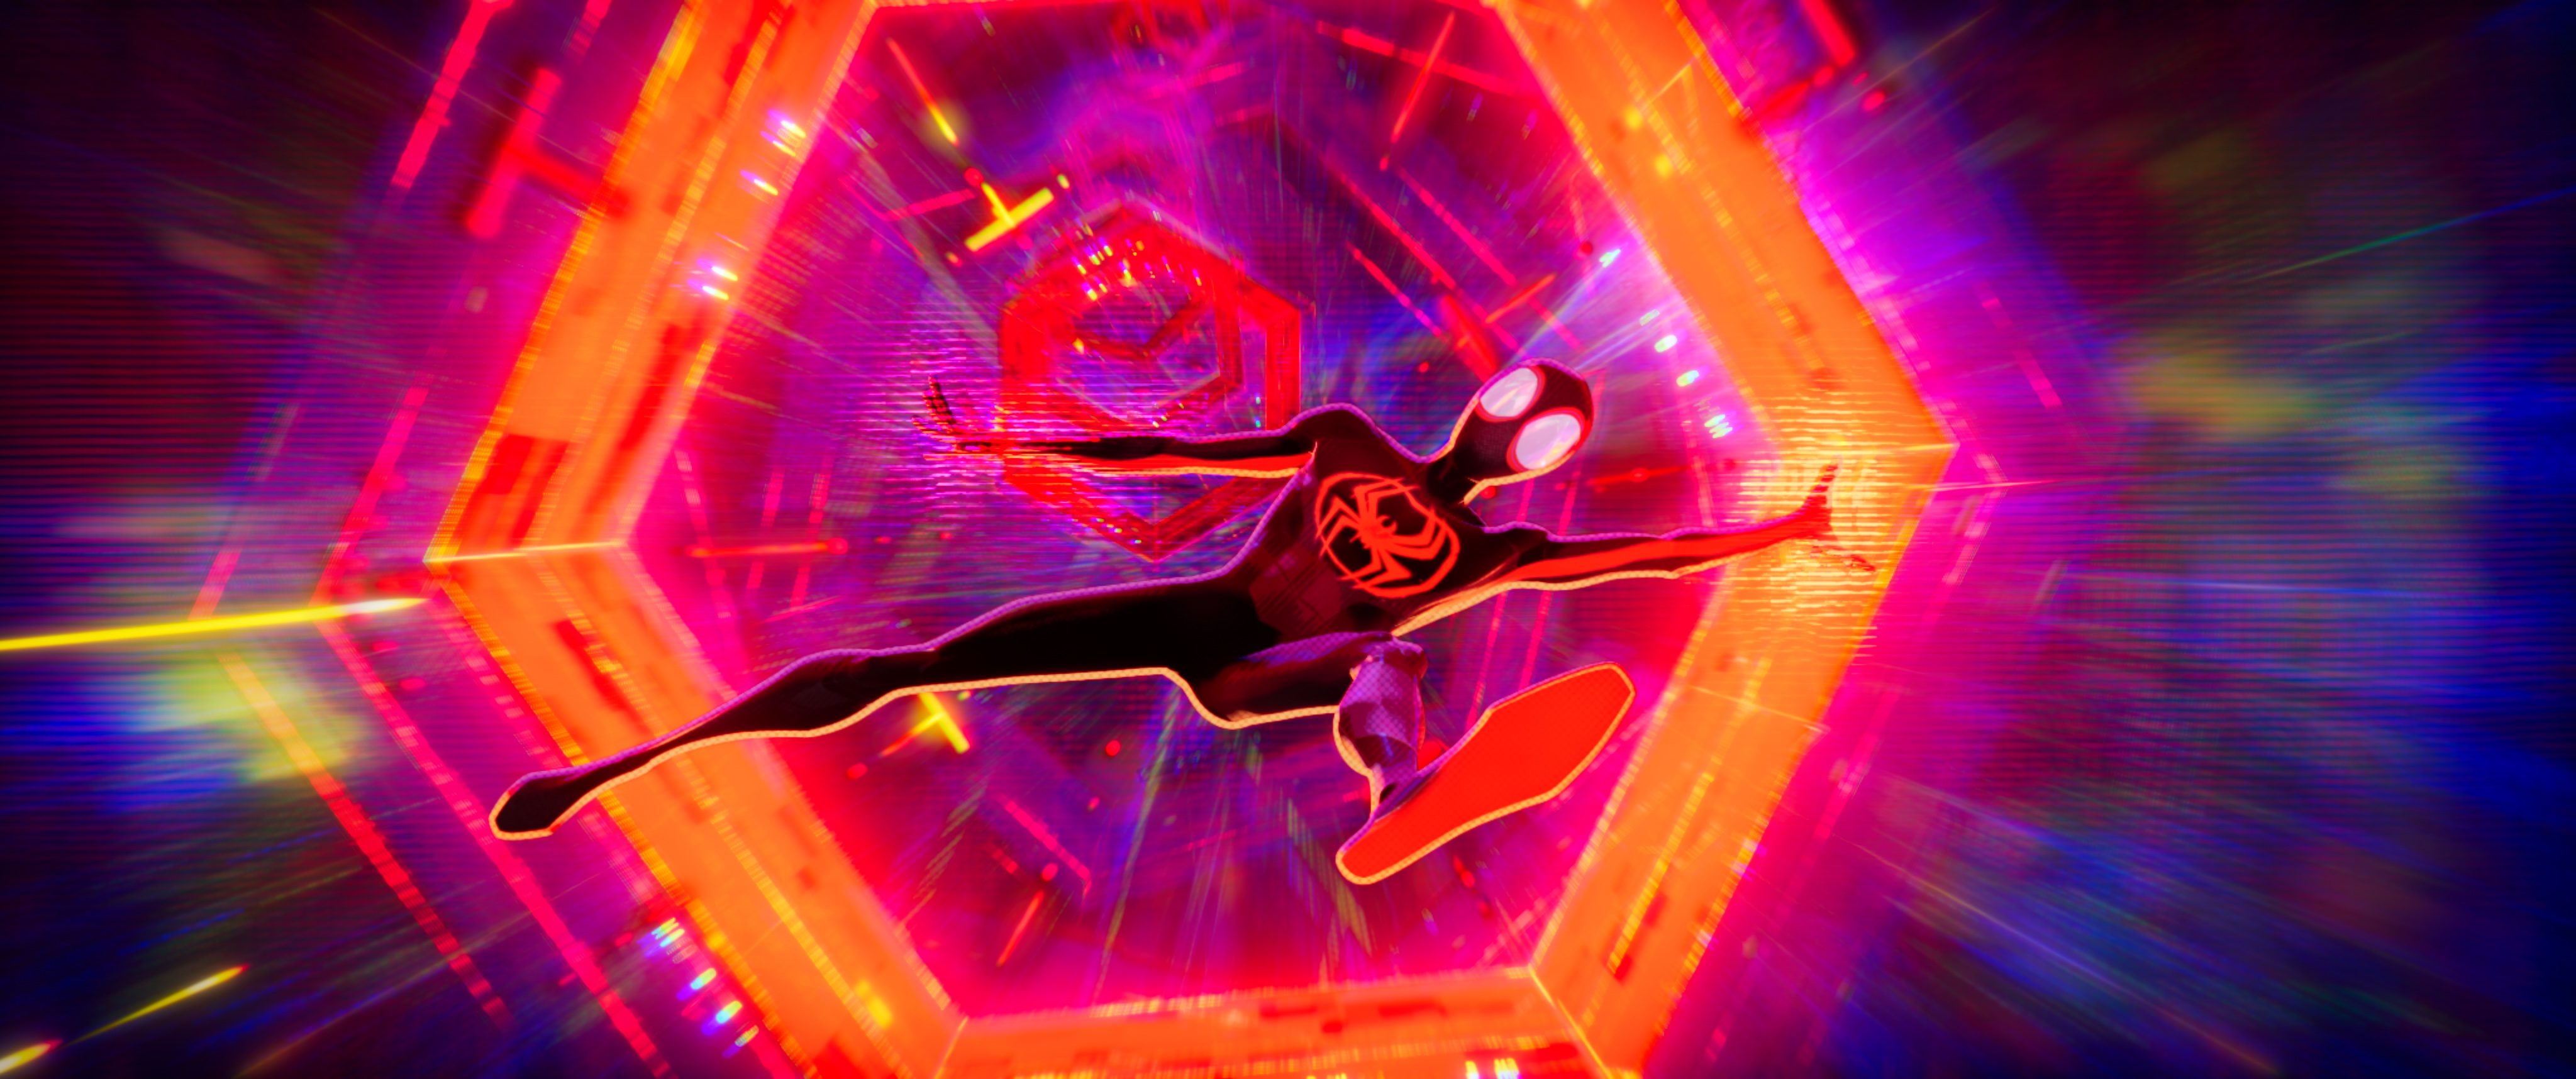 Miles Morales falling through a portal in Spider-Man: Across the Spider-verse Part 1